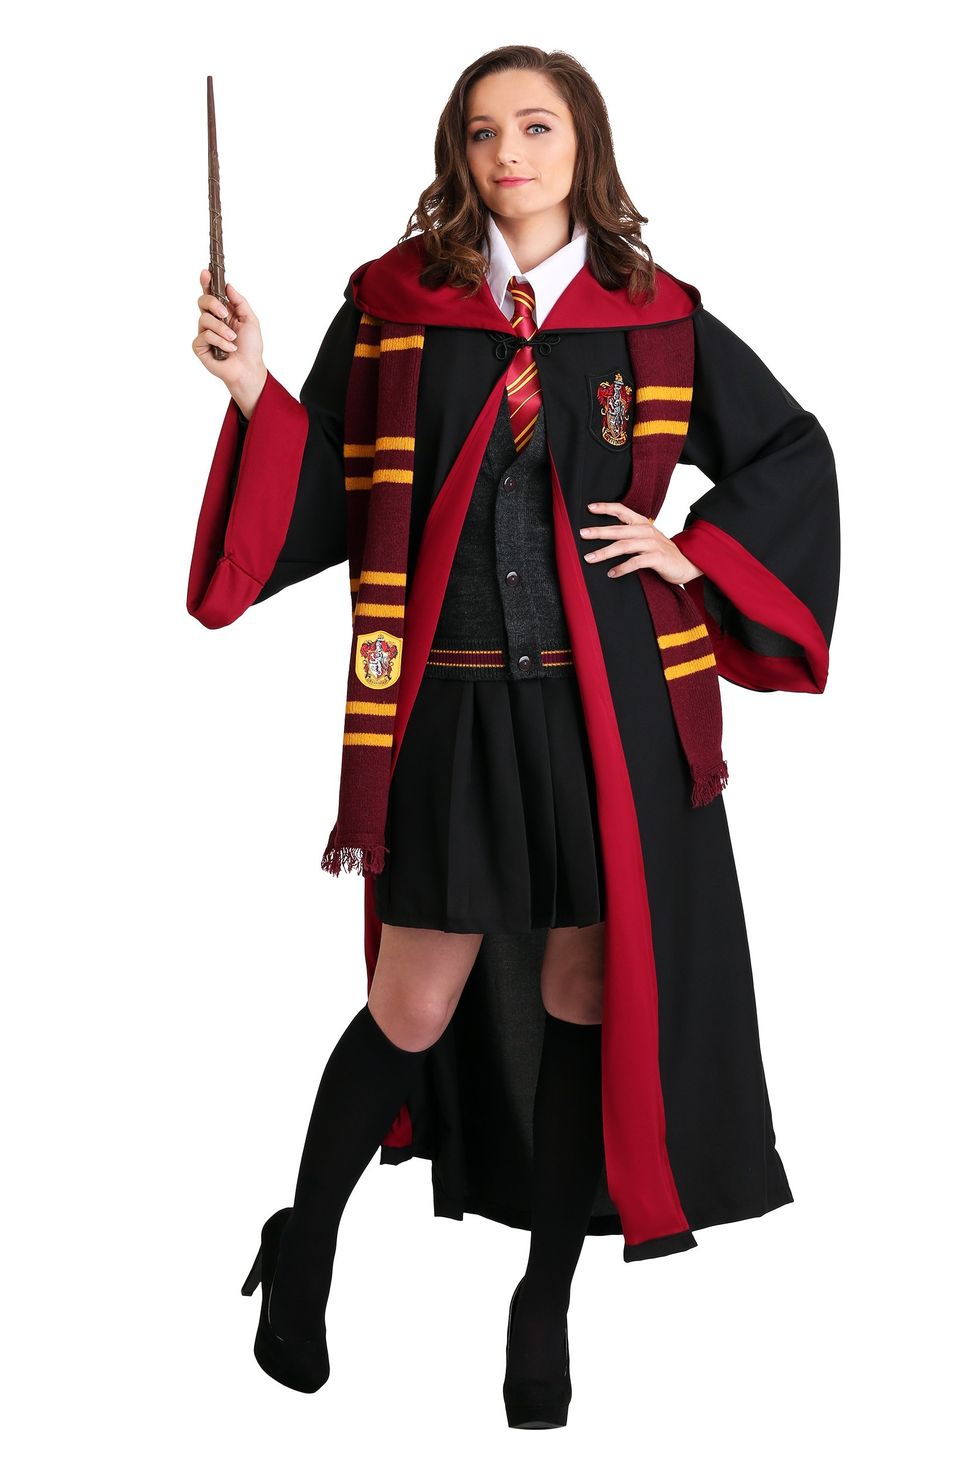 https://hips.hearstapps.com/hmg-prod/images/harry-potter-costume-hermione-1567611696.jpg?crop=0.9523809523809524xw:1xh;center,top&resize=980:*